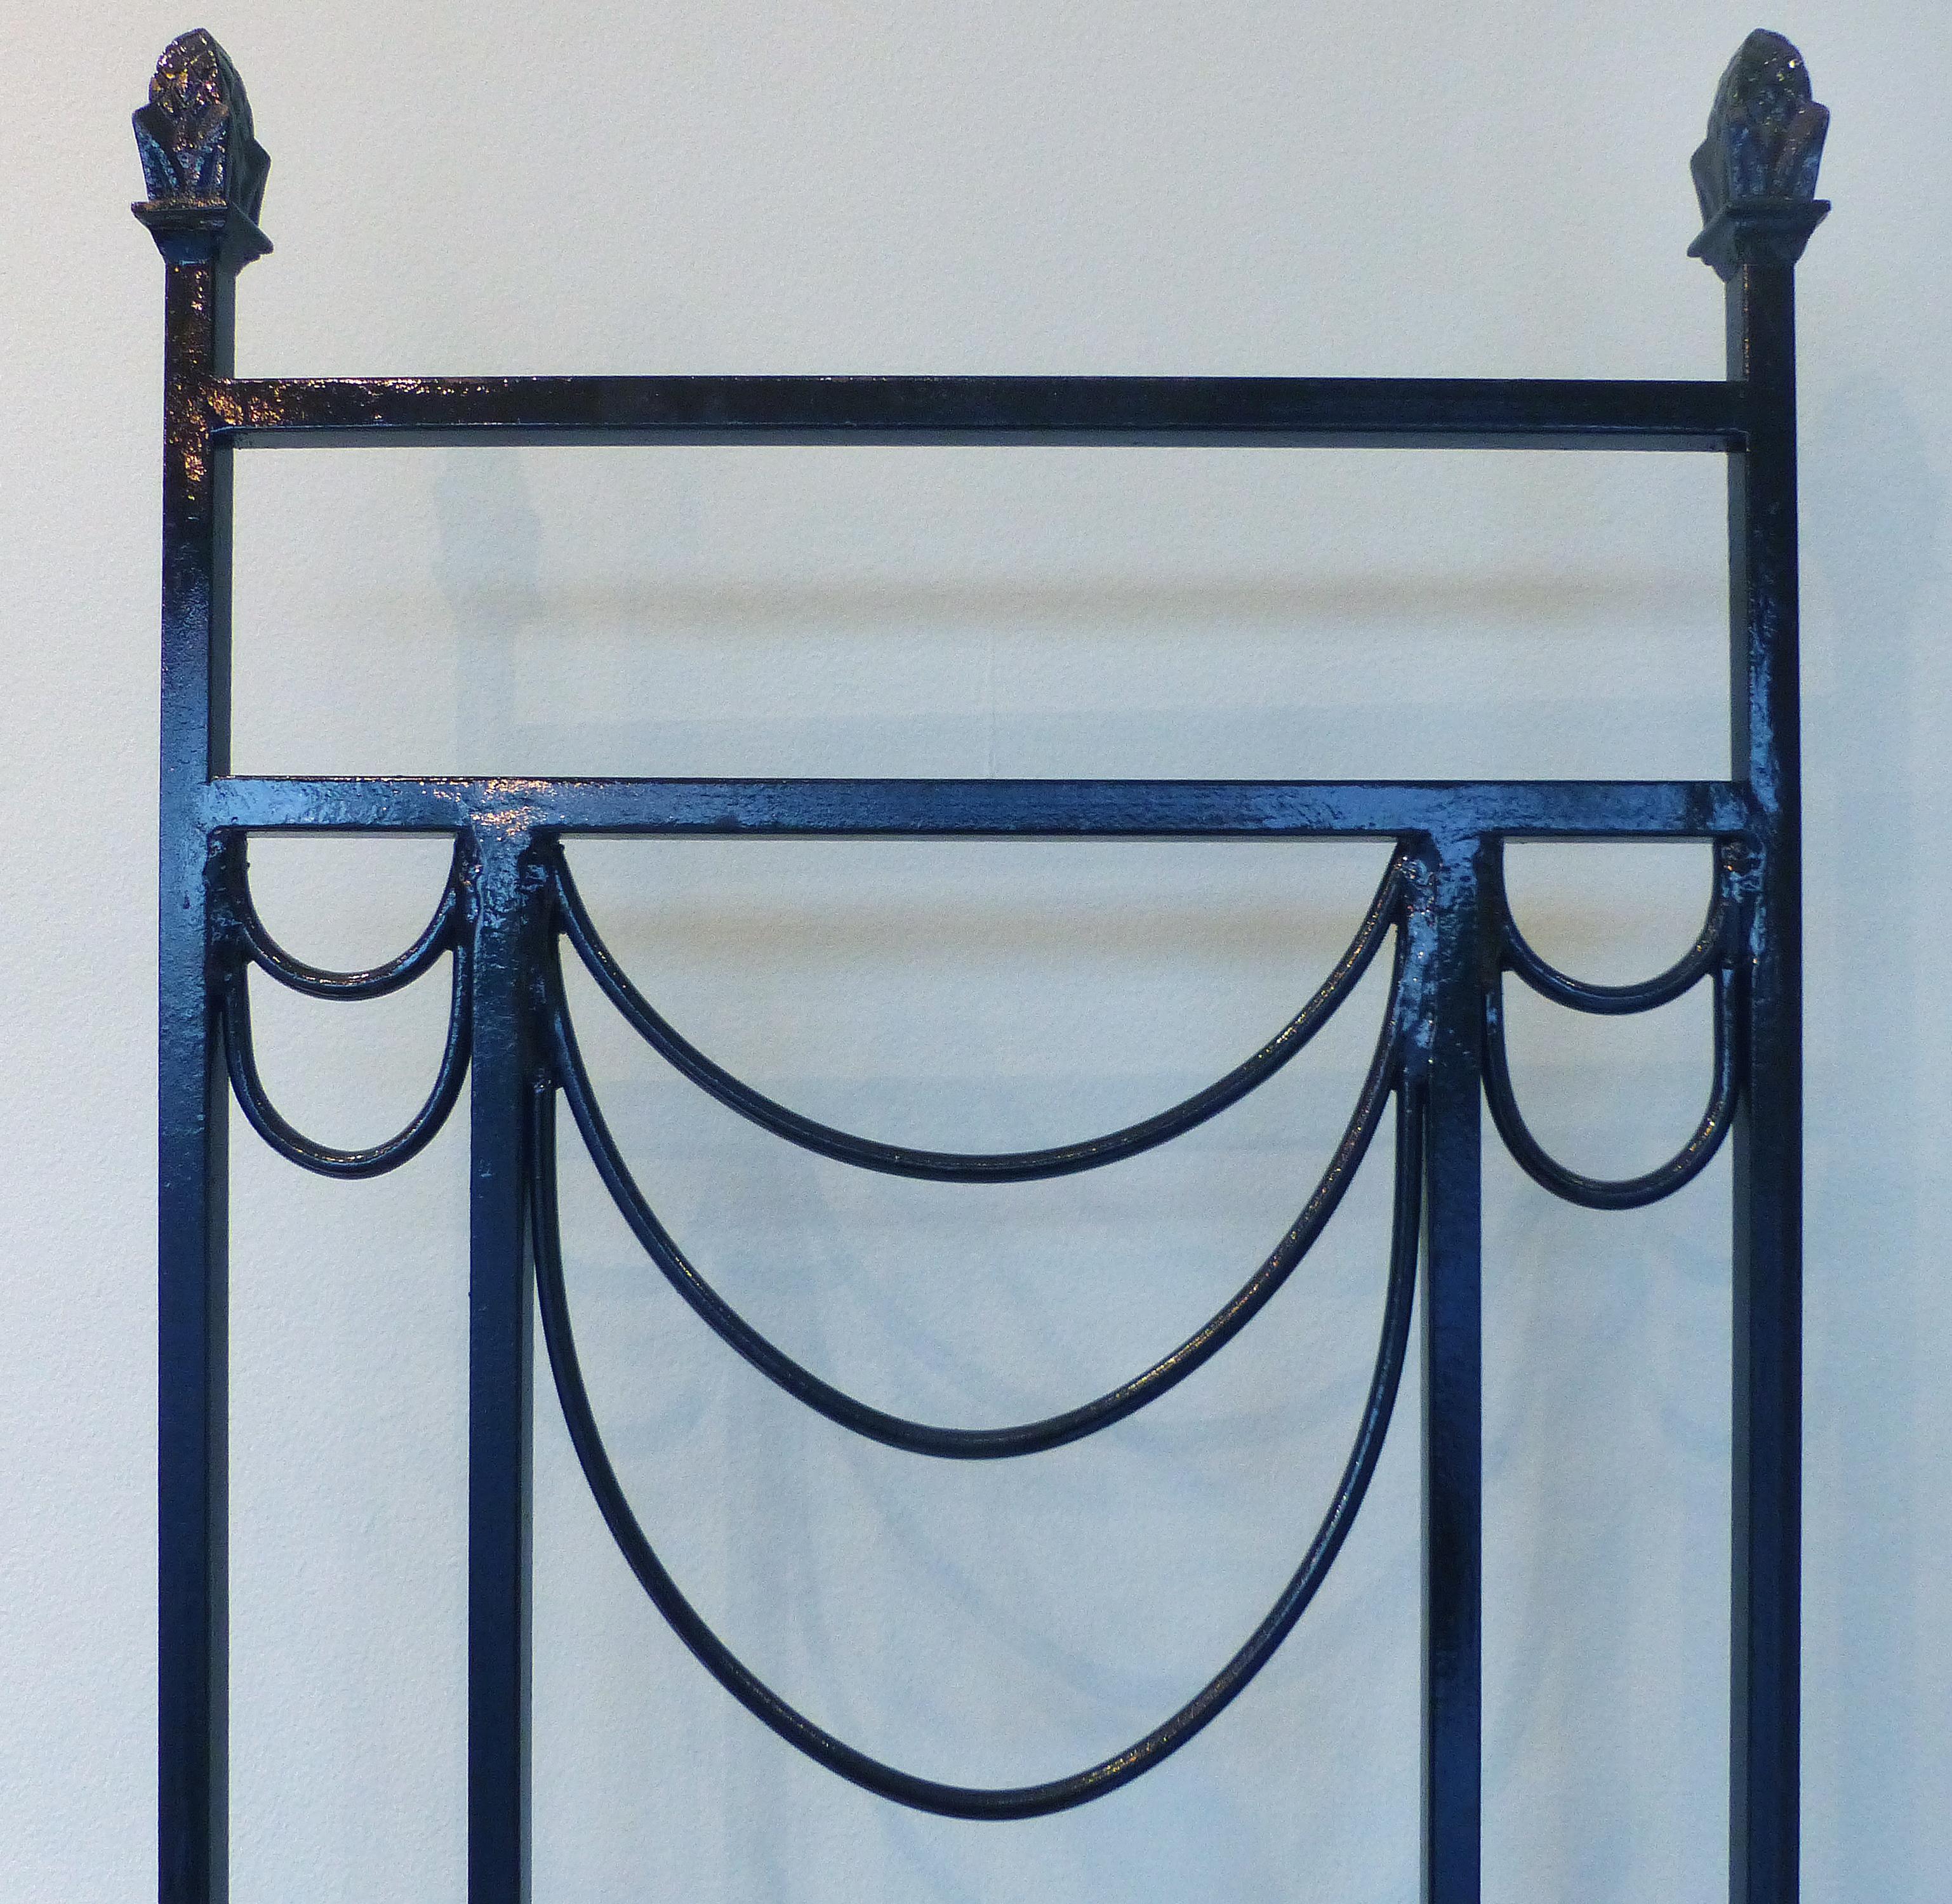 Late 20th Century Tall Back Sculptural Wrought Iron Chair in the Manner of Mackintosh